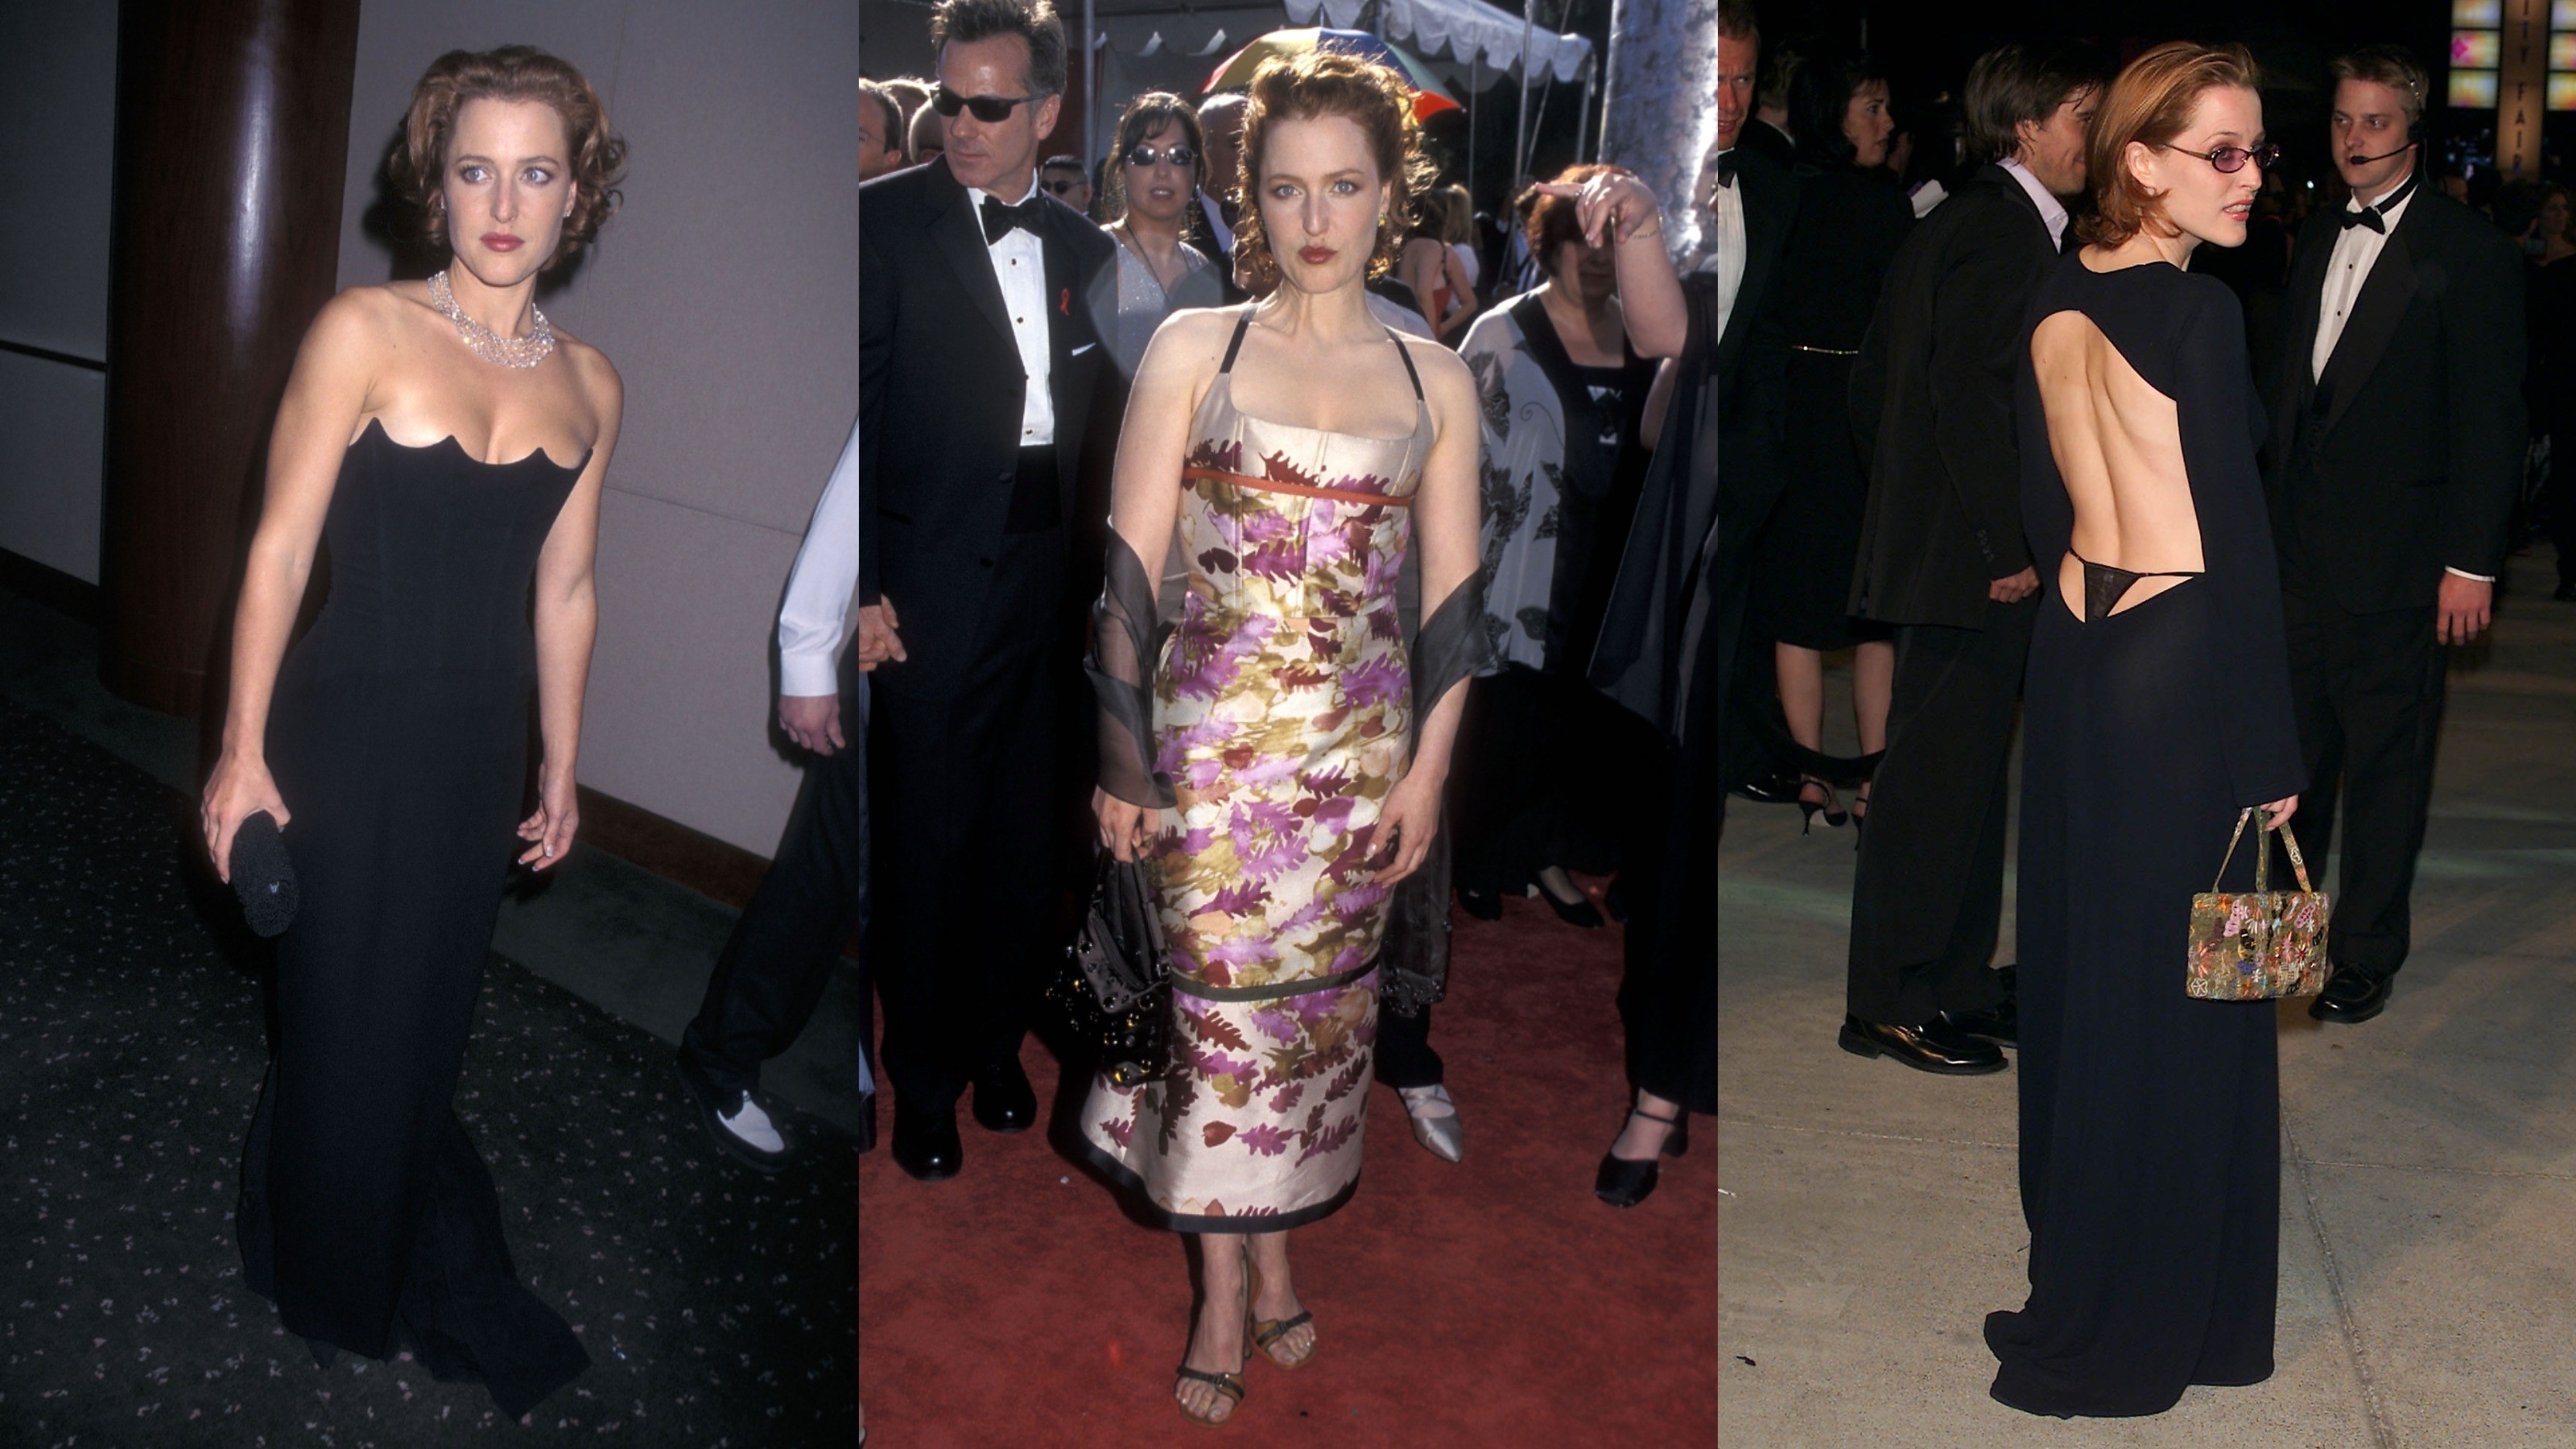 15 Times Angelina Jolie Mixed Gothic With Hollywood Glamour In The '90s